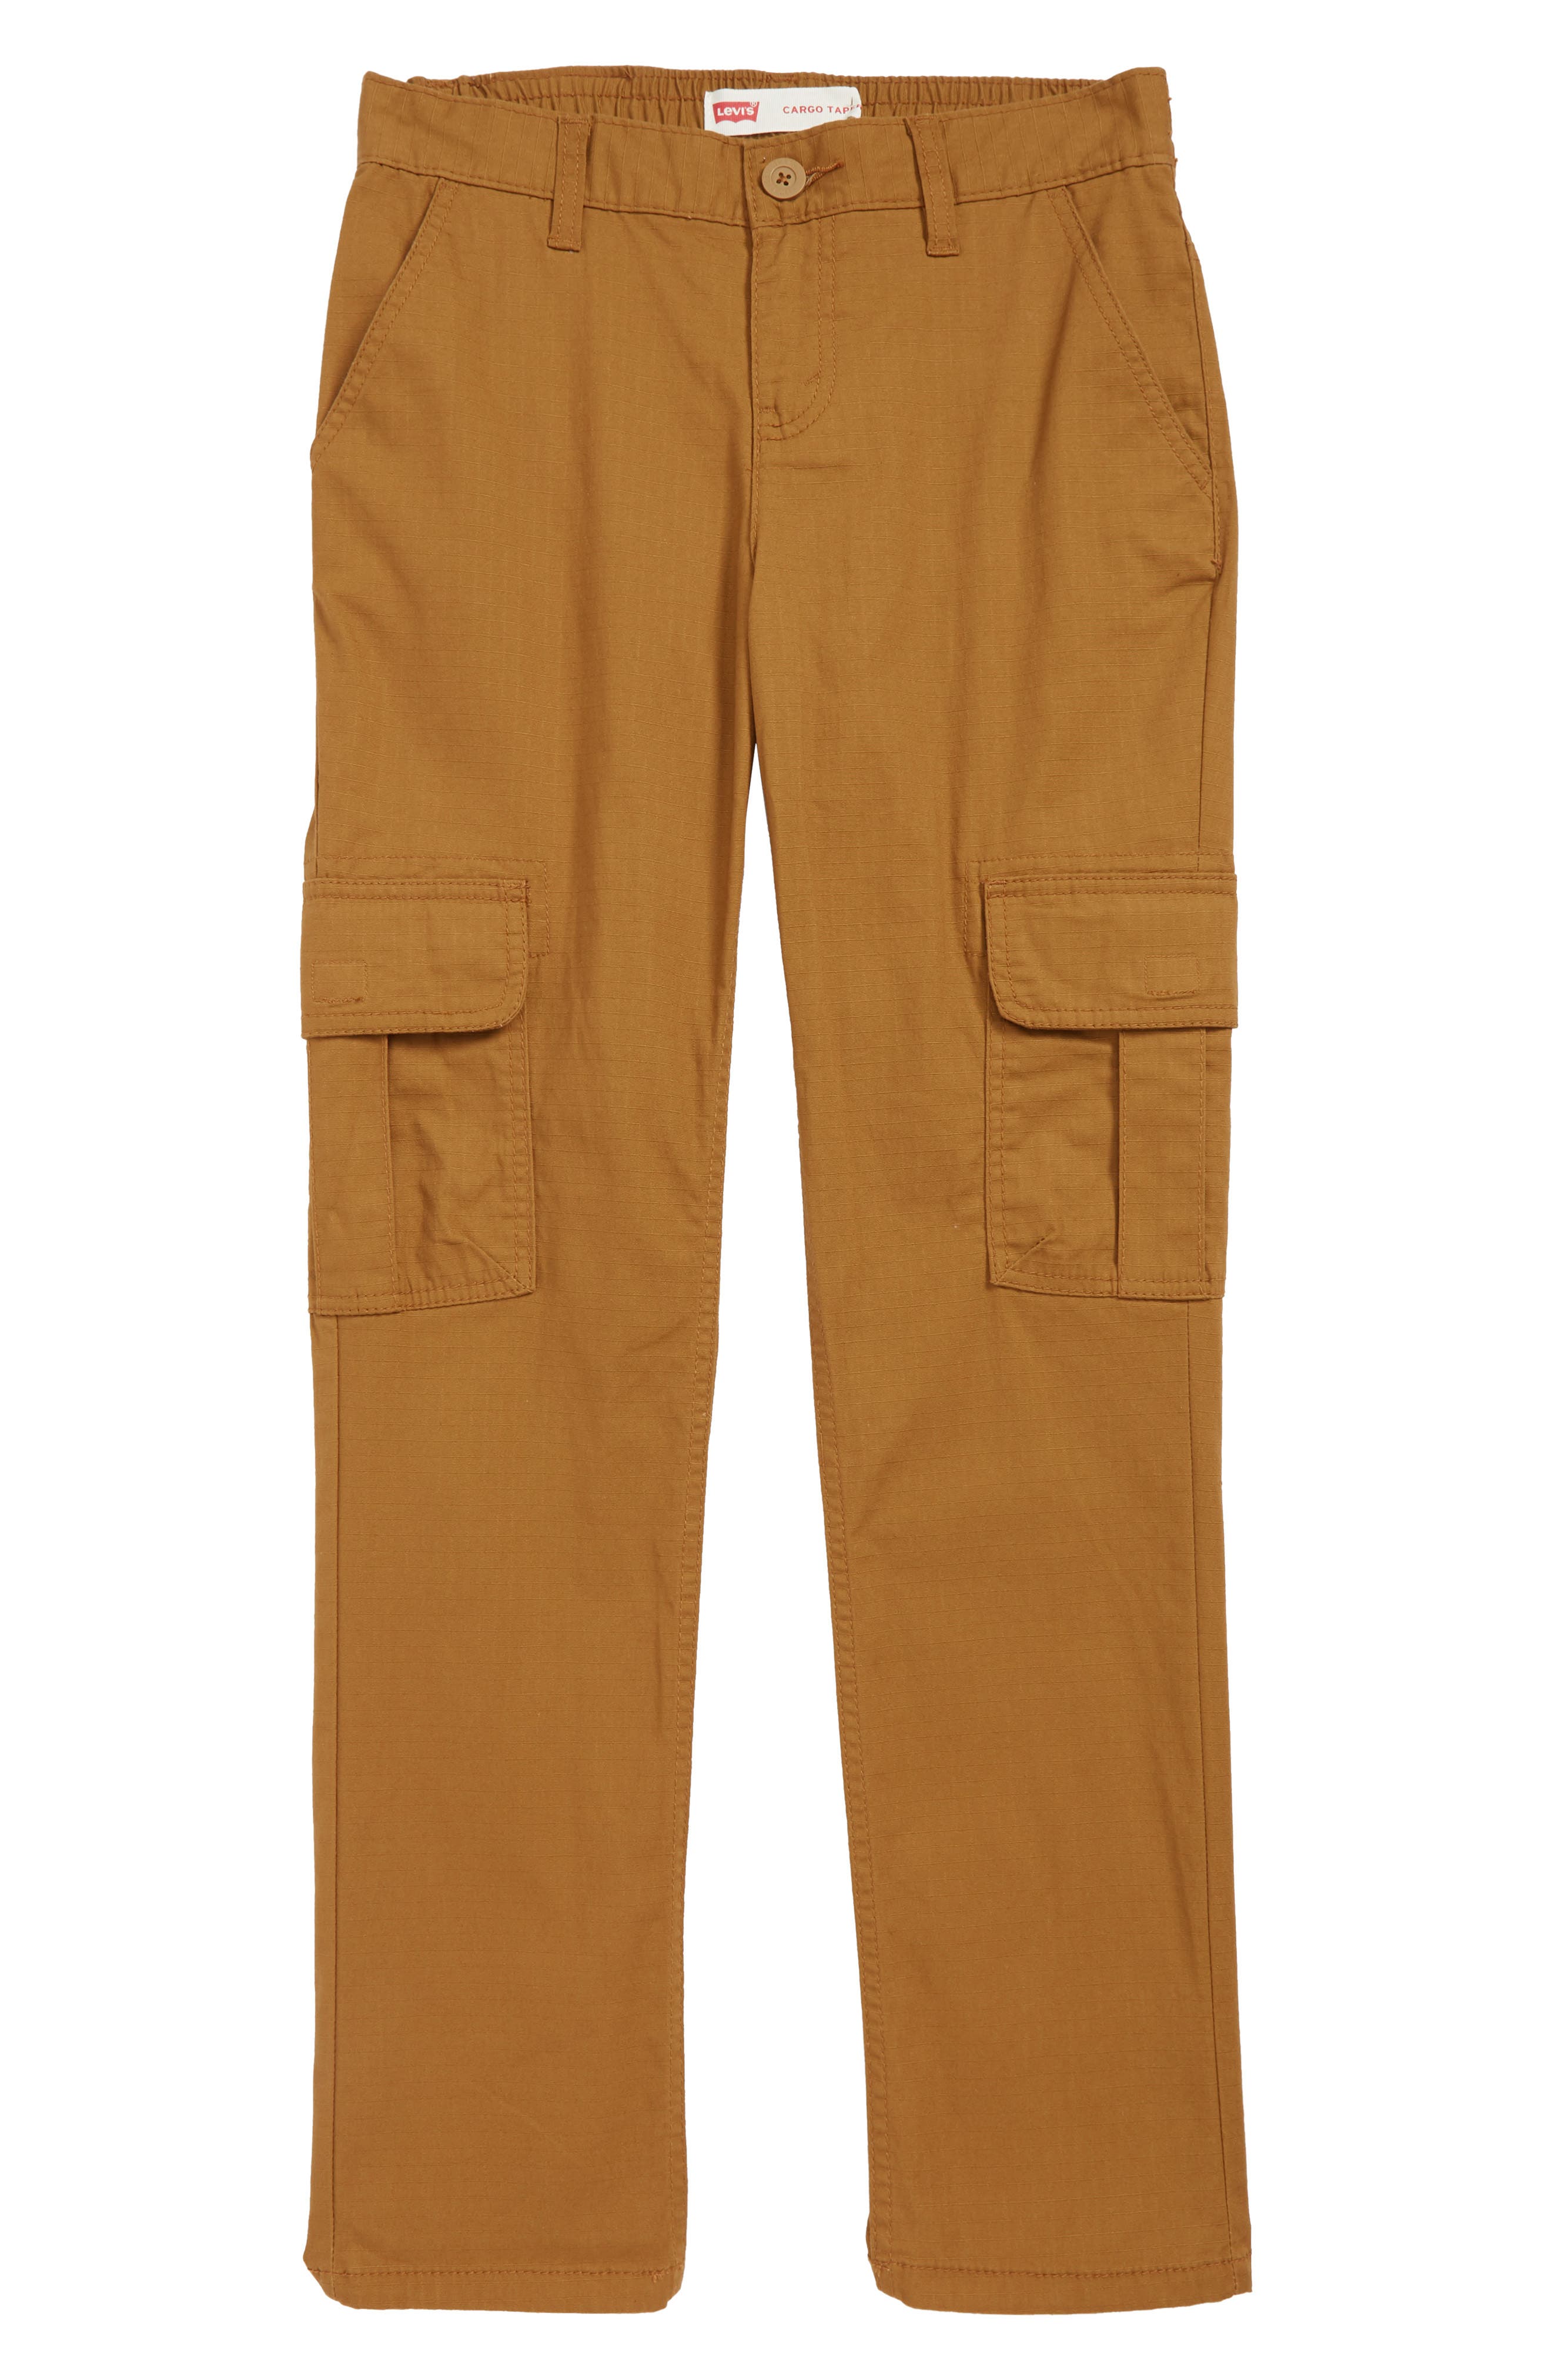 UPC 617847156823 product image for Boy's Levi'S Stretch Cargo Tapered Pants, Size 12 - Beige | upcitemdb.com